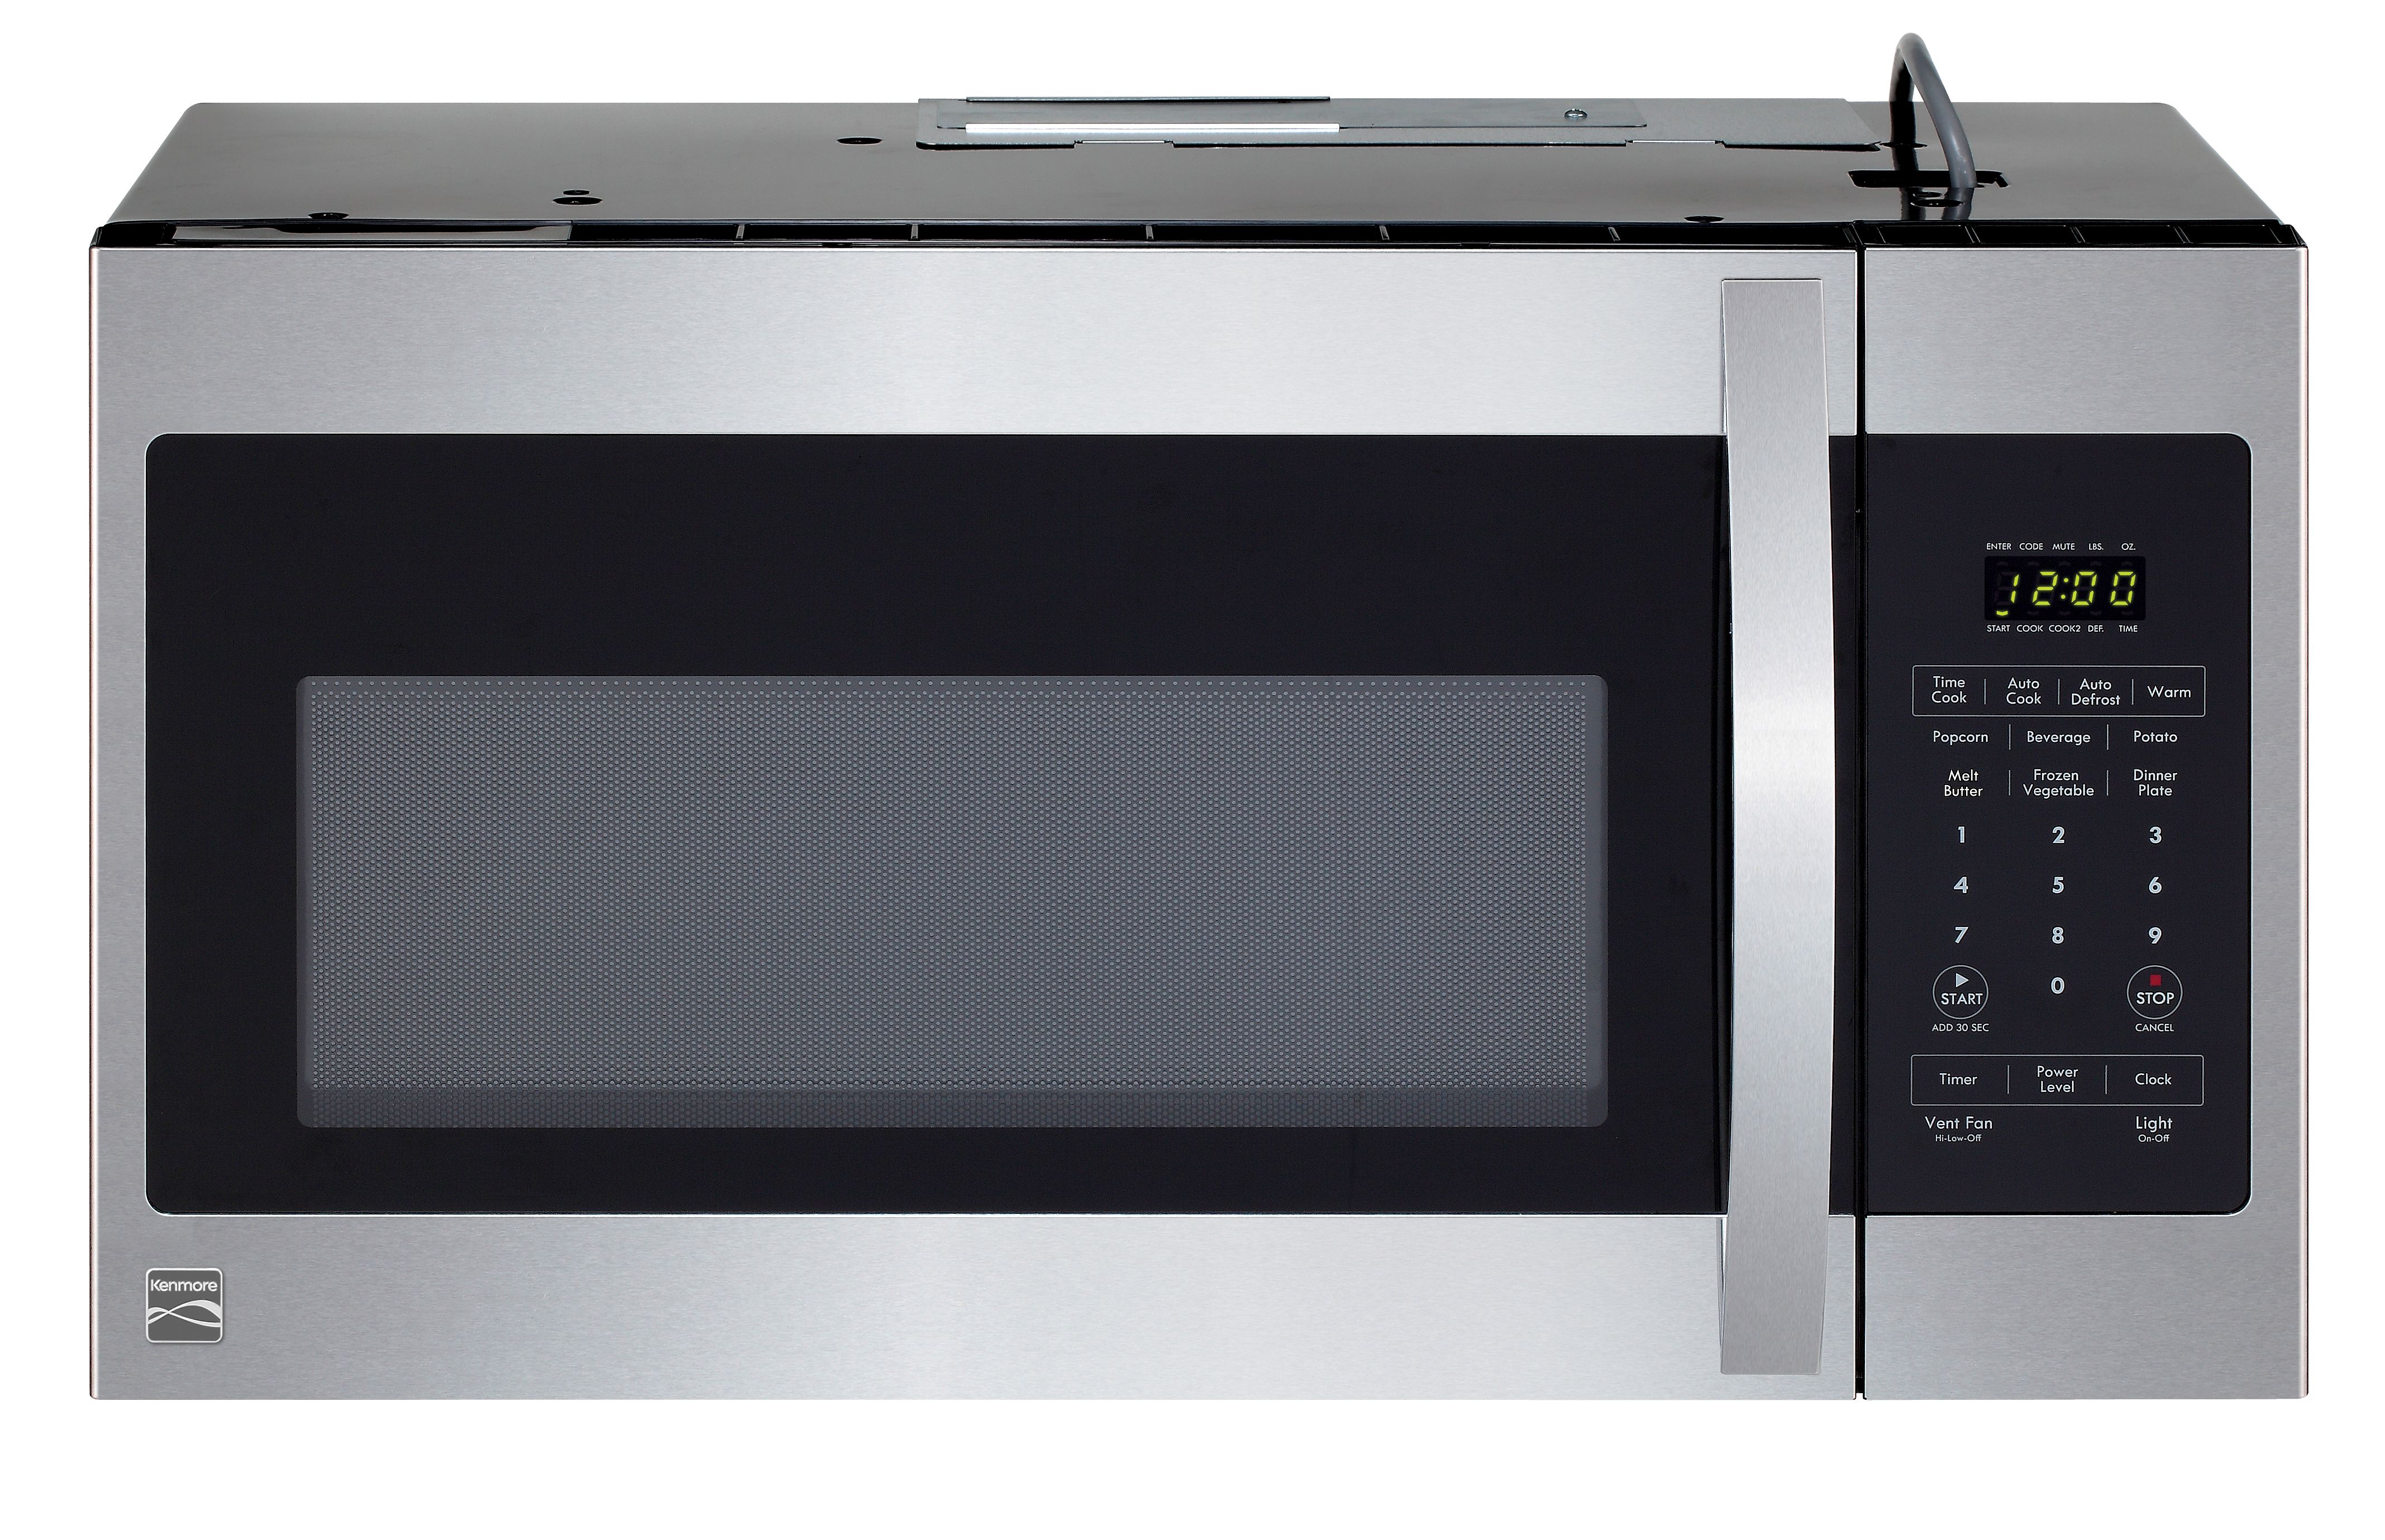 Kenmore 83523 1.6 cu. ft. OvertheRange Microwave Oven Stainless Steel Shop Your Way